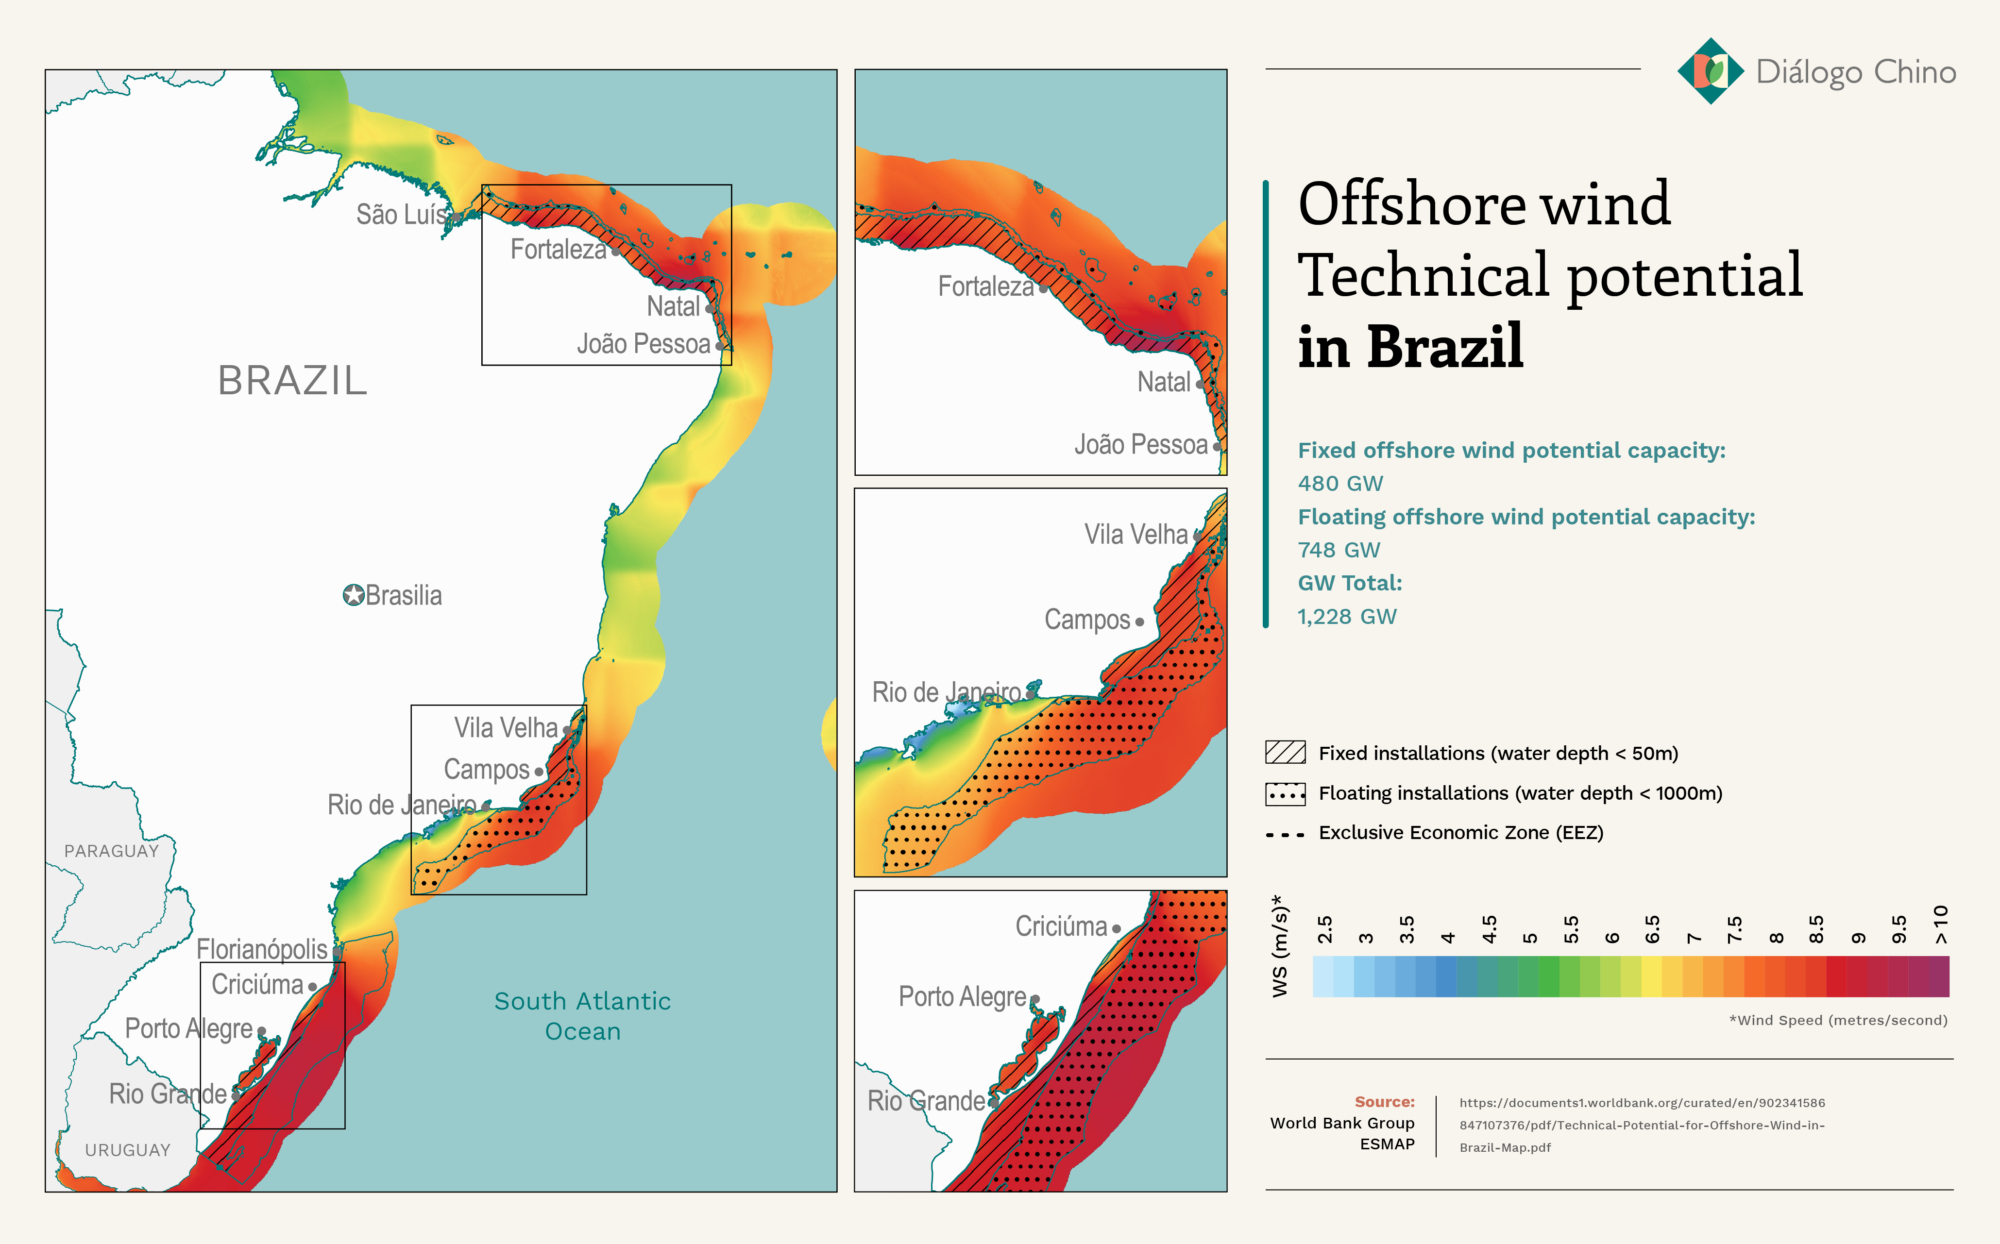 Map showing Brazil's offshore wind potential